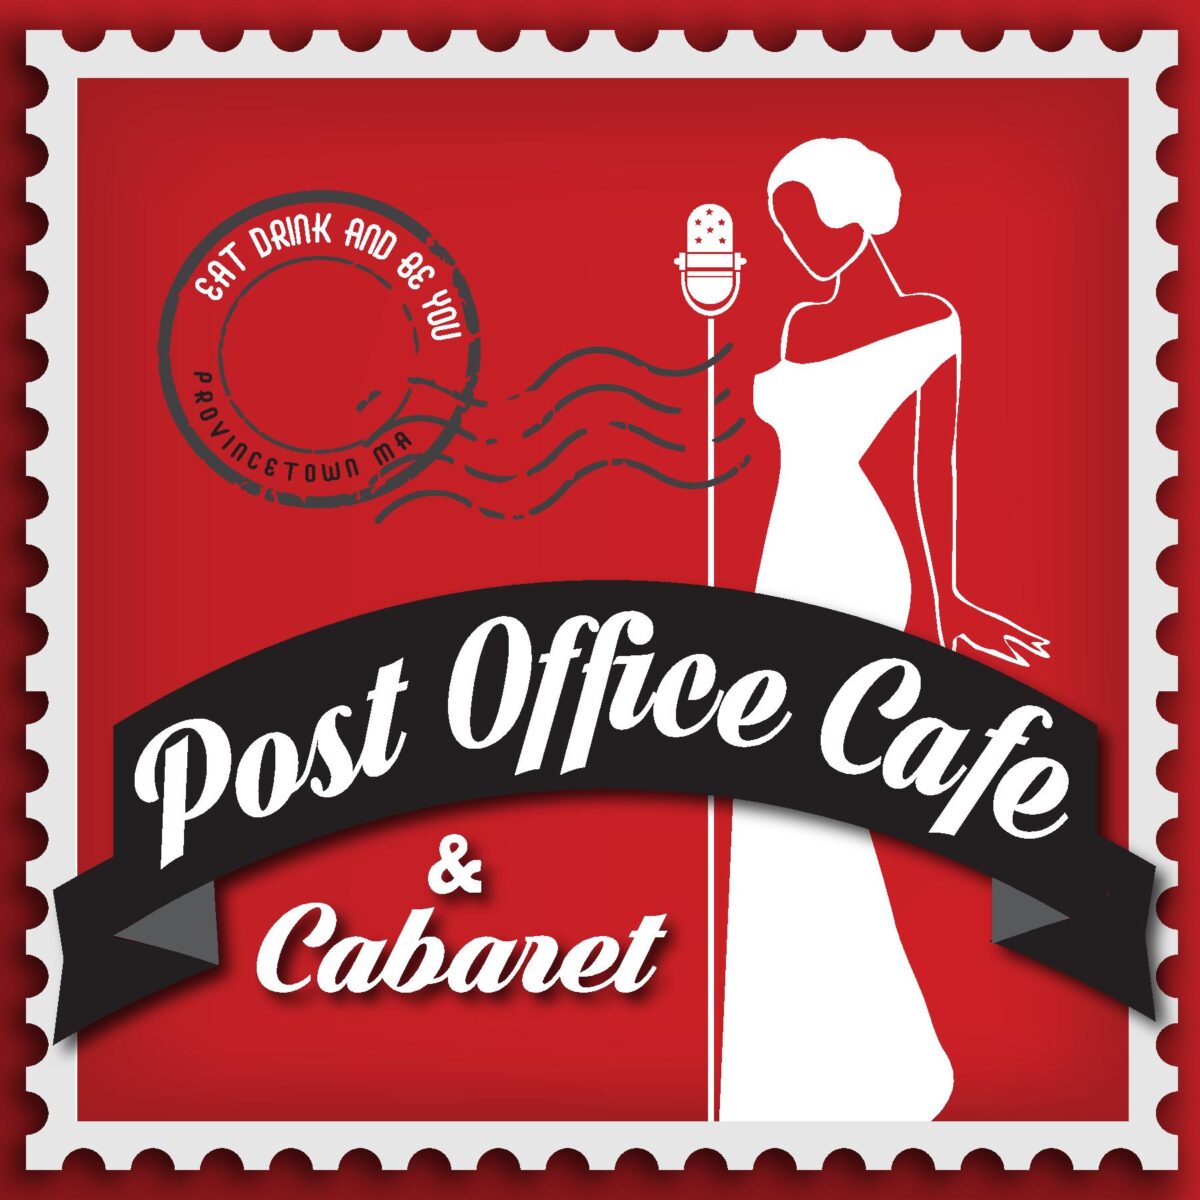 The Post Office Cafe & Cabaret